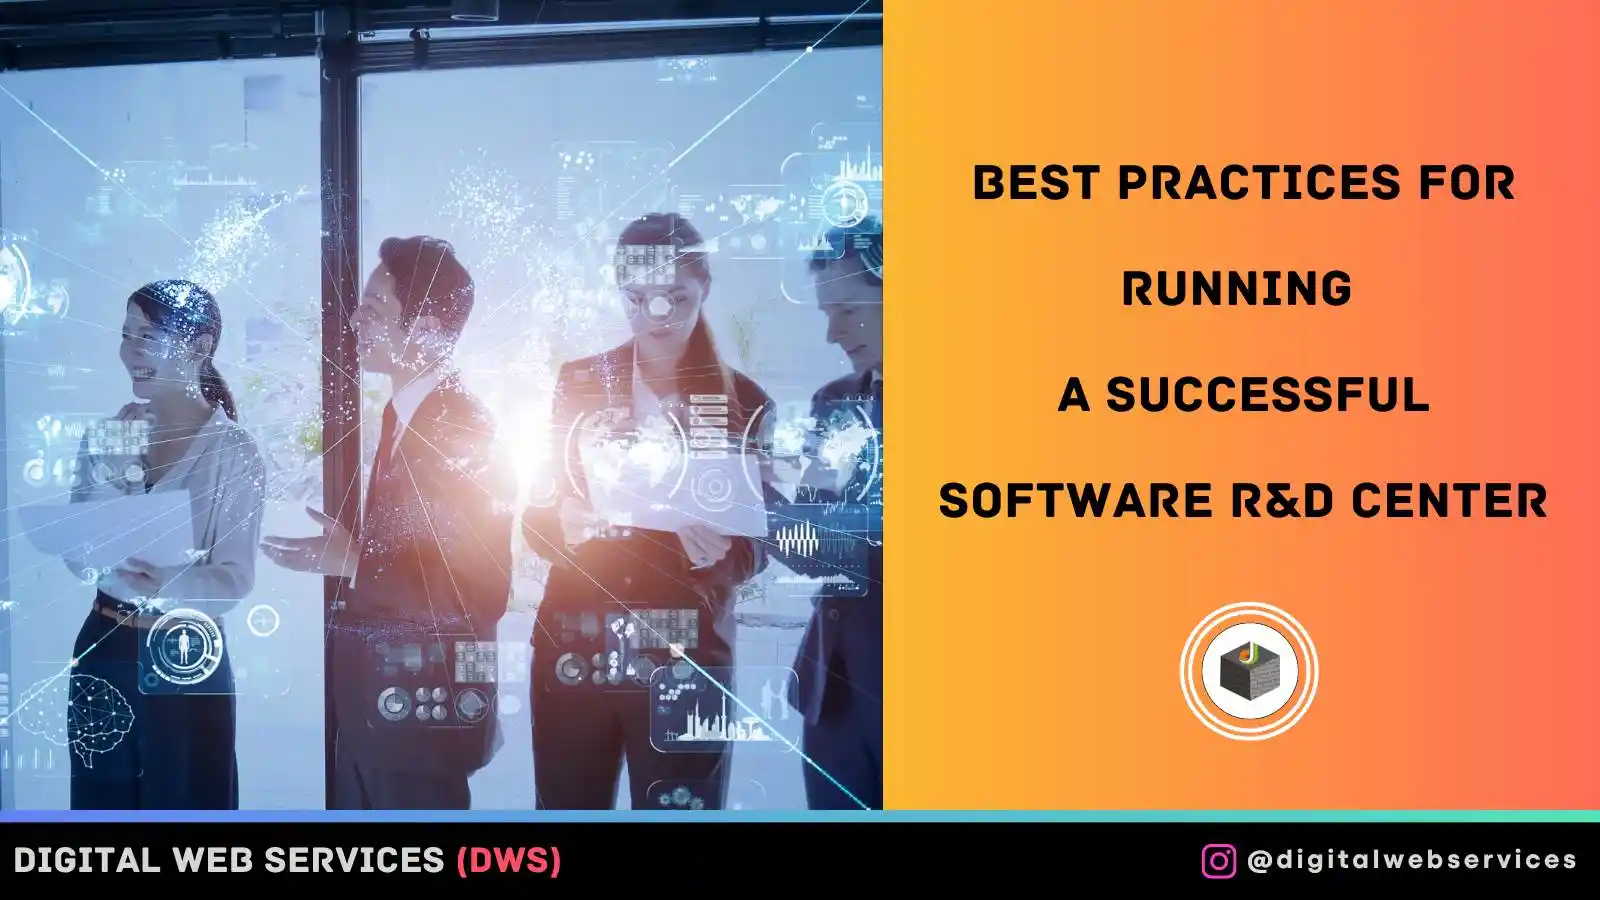 Best Practices for Running a Successful Software R&D Center